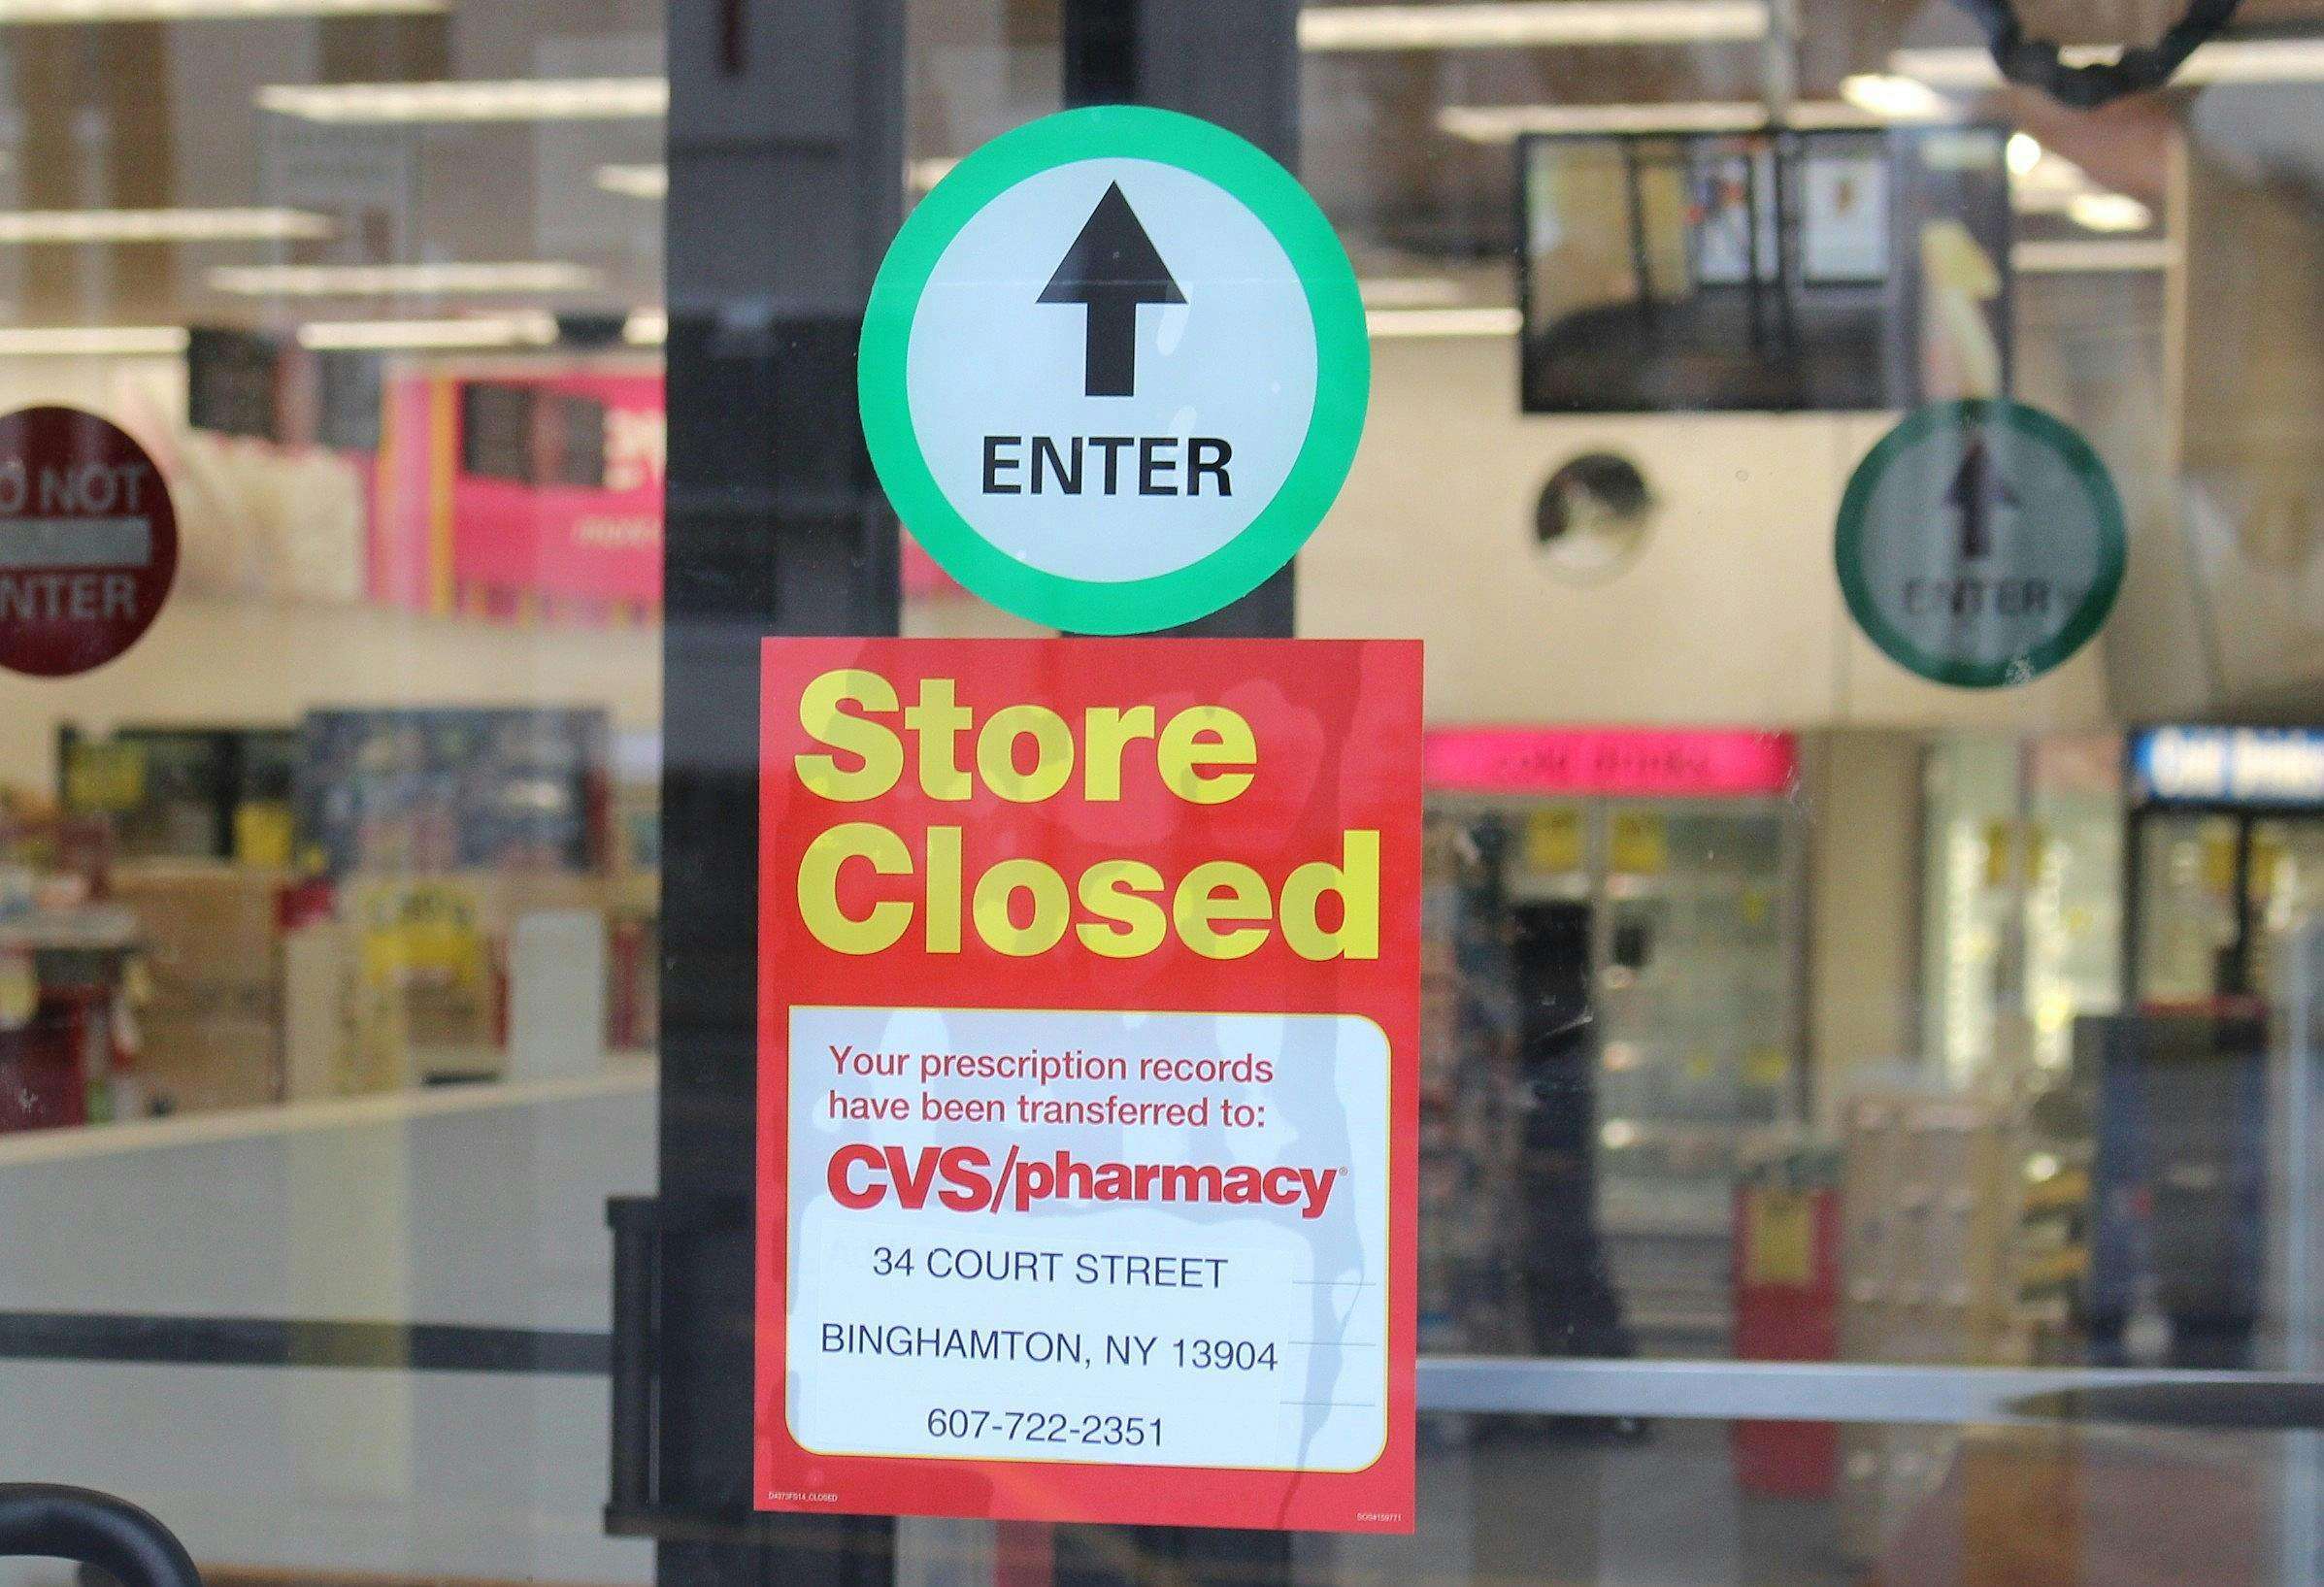 There have already been 29% more store closures this year than from all of 2018.